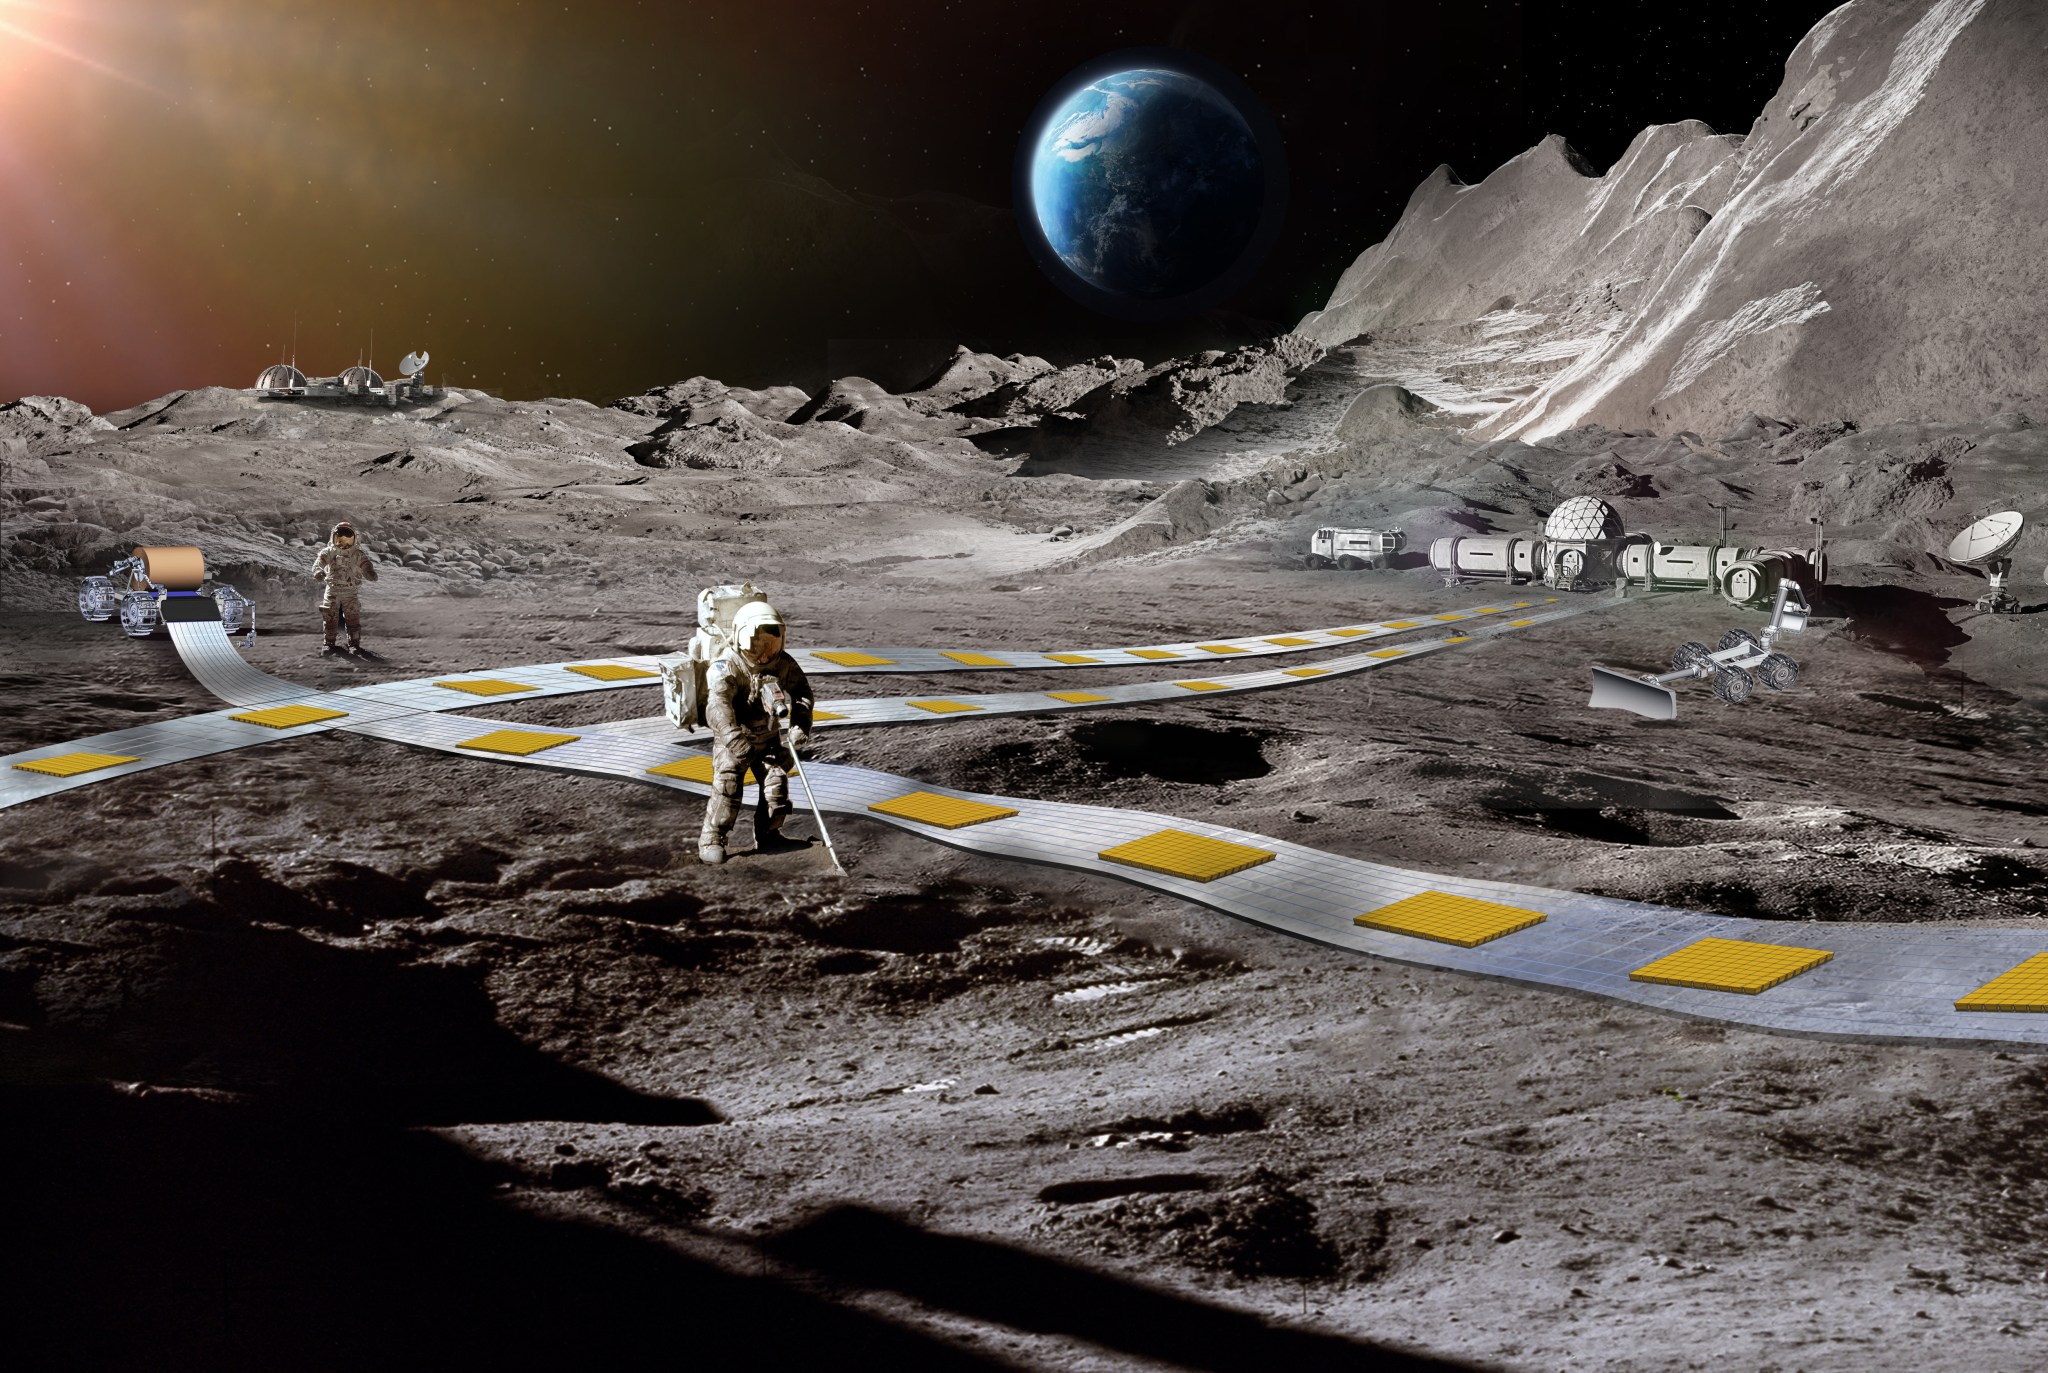 Astronaut working on levitation track on lunar surface with Earth in distant sky.